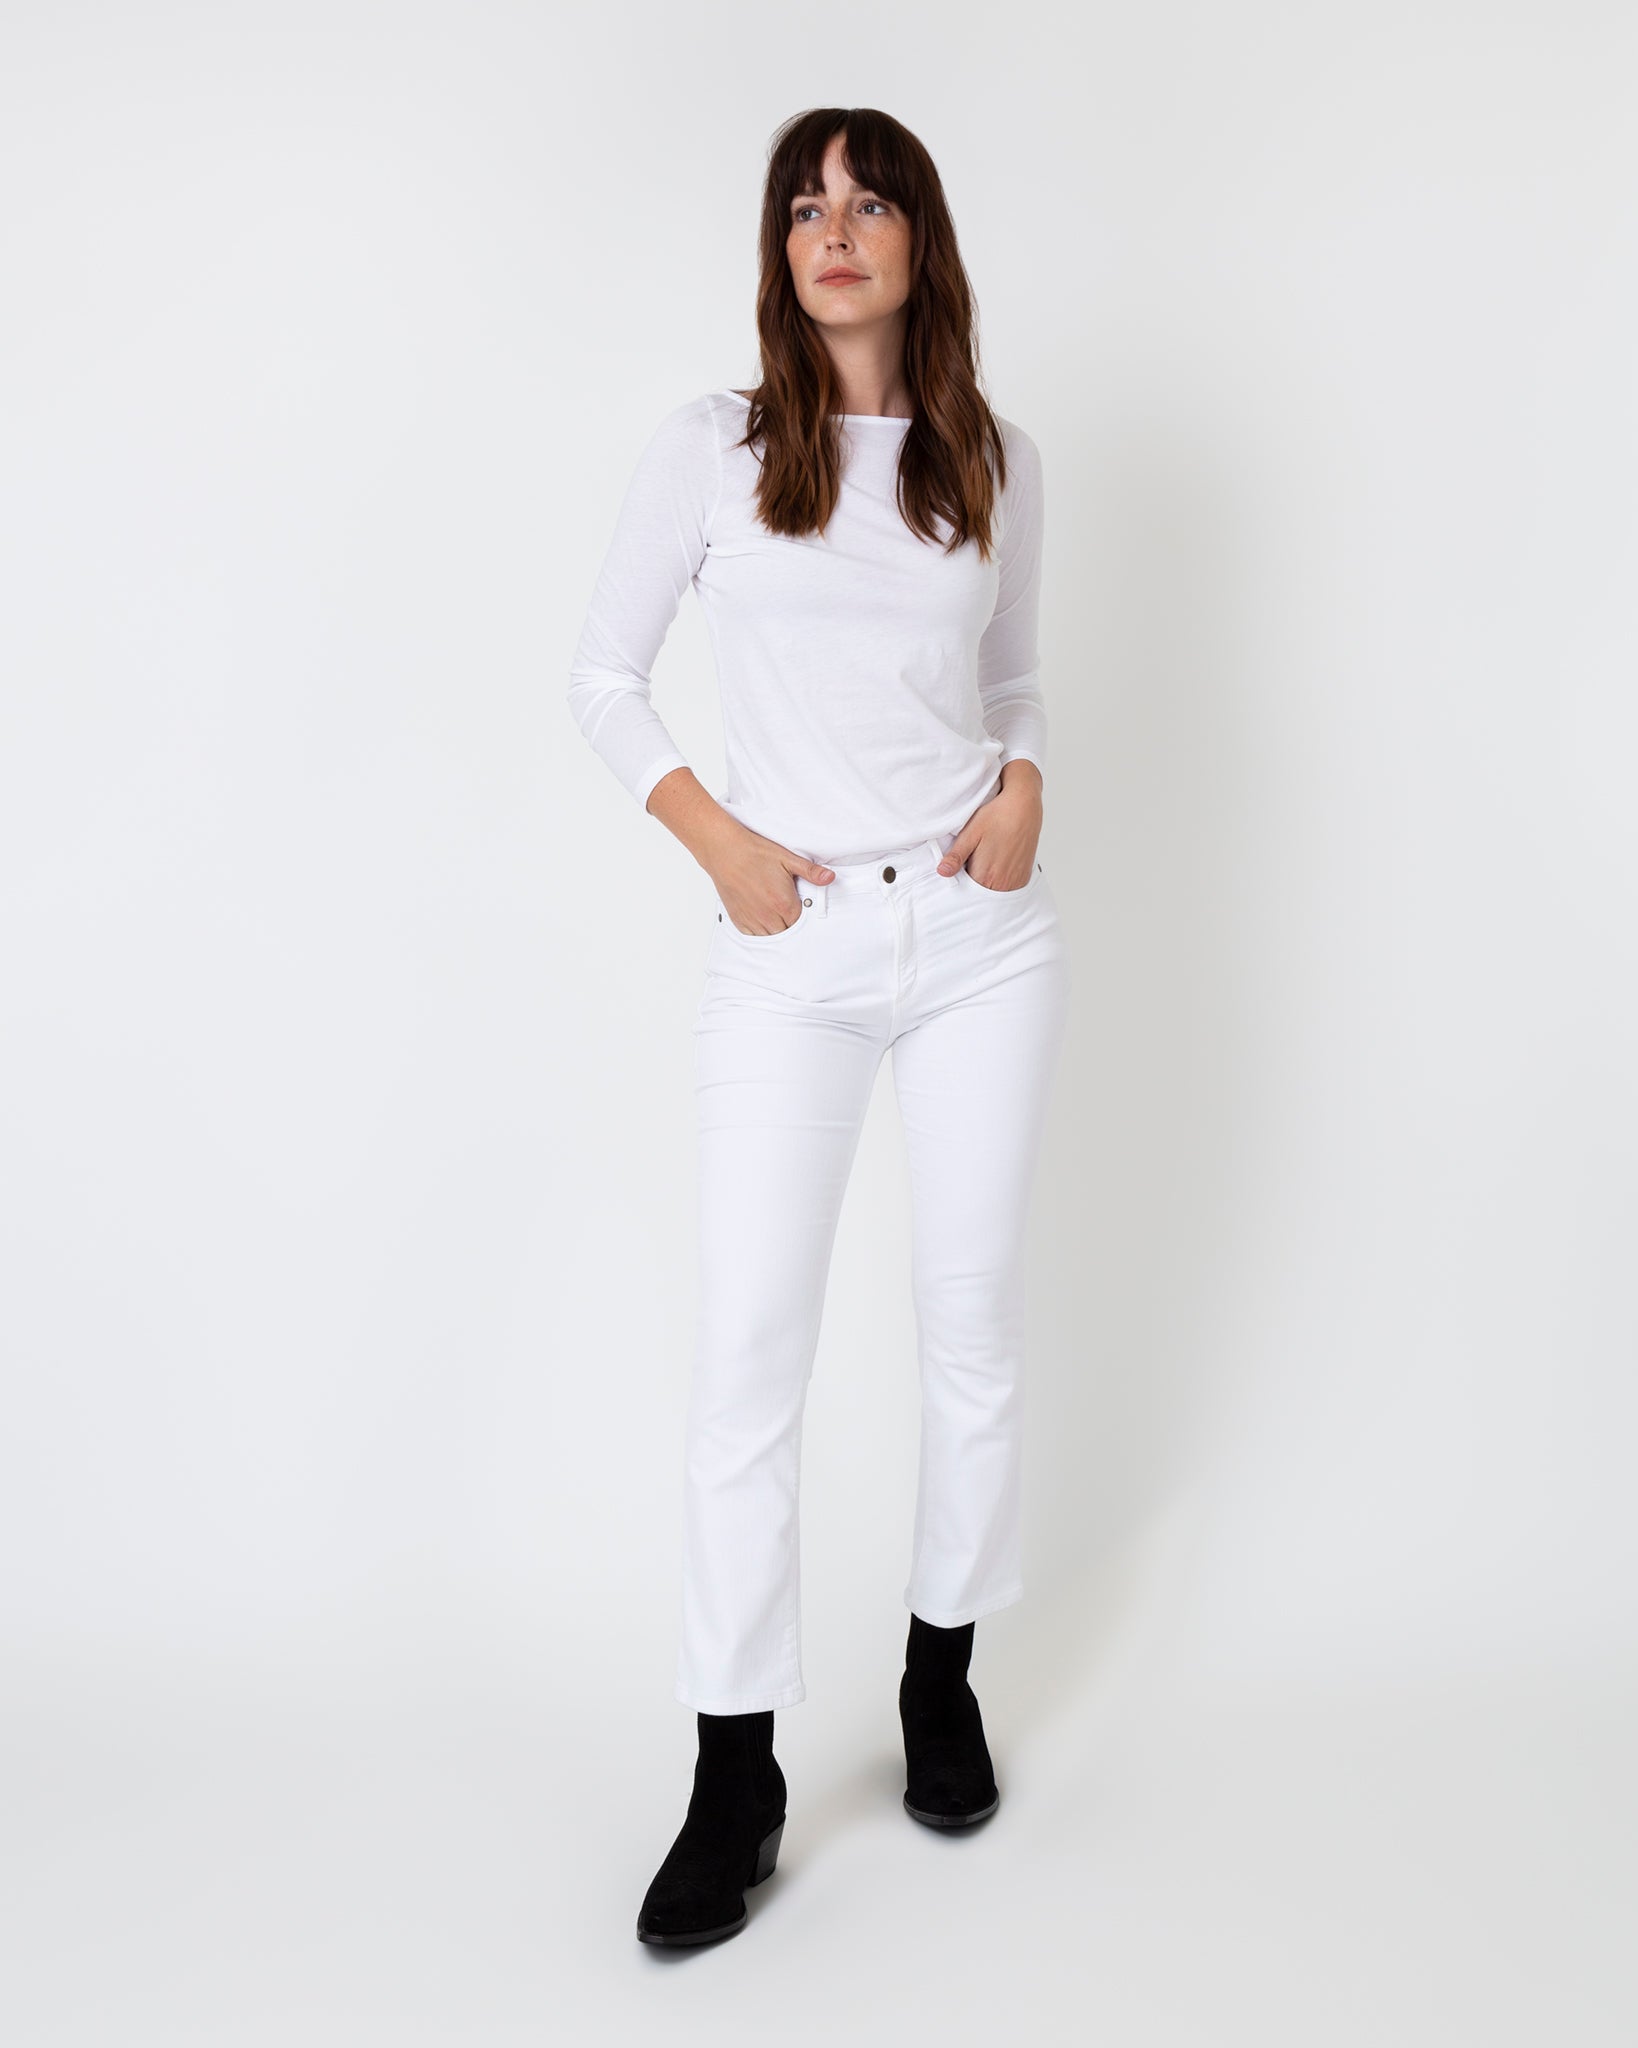 Long-Sleeved Boatneck Tee in White Pima Cotton